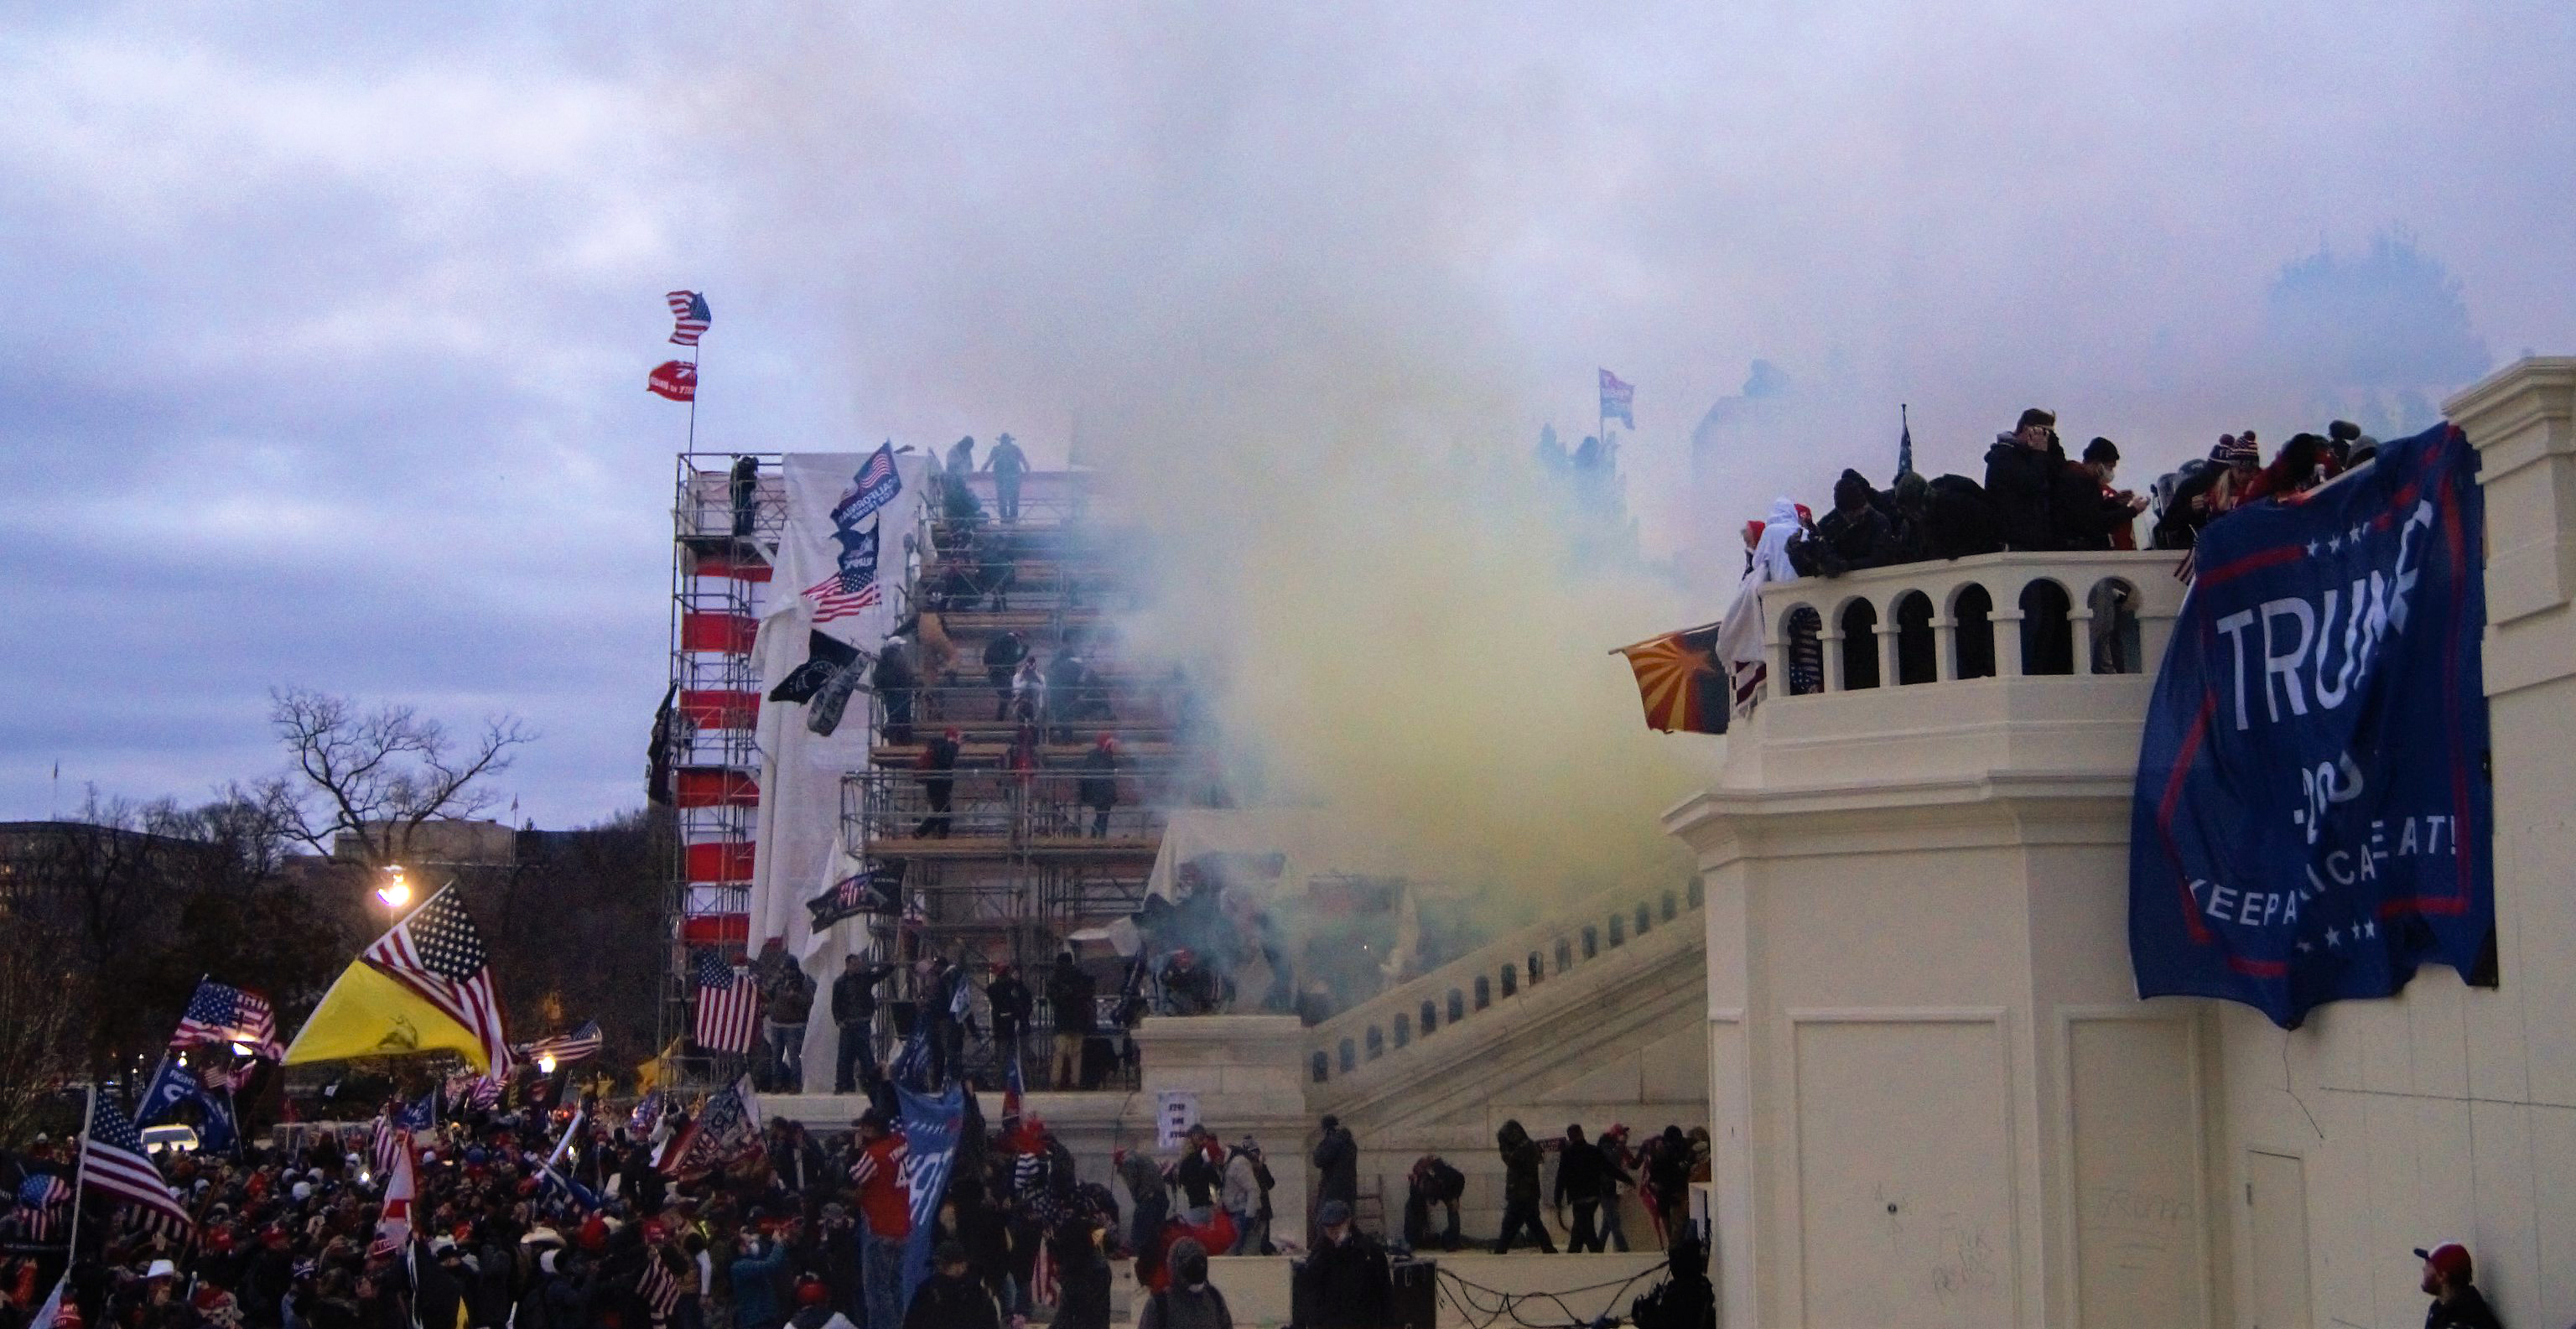 Tear gas outside the United States Capitol on 6 January 2021. Photo by Tyler Merbler from USA, CC BY 2.0 , via Wikimedia Commons